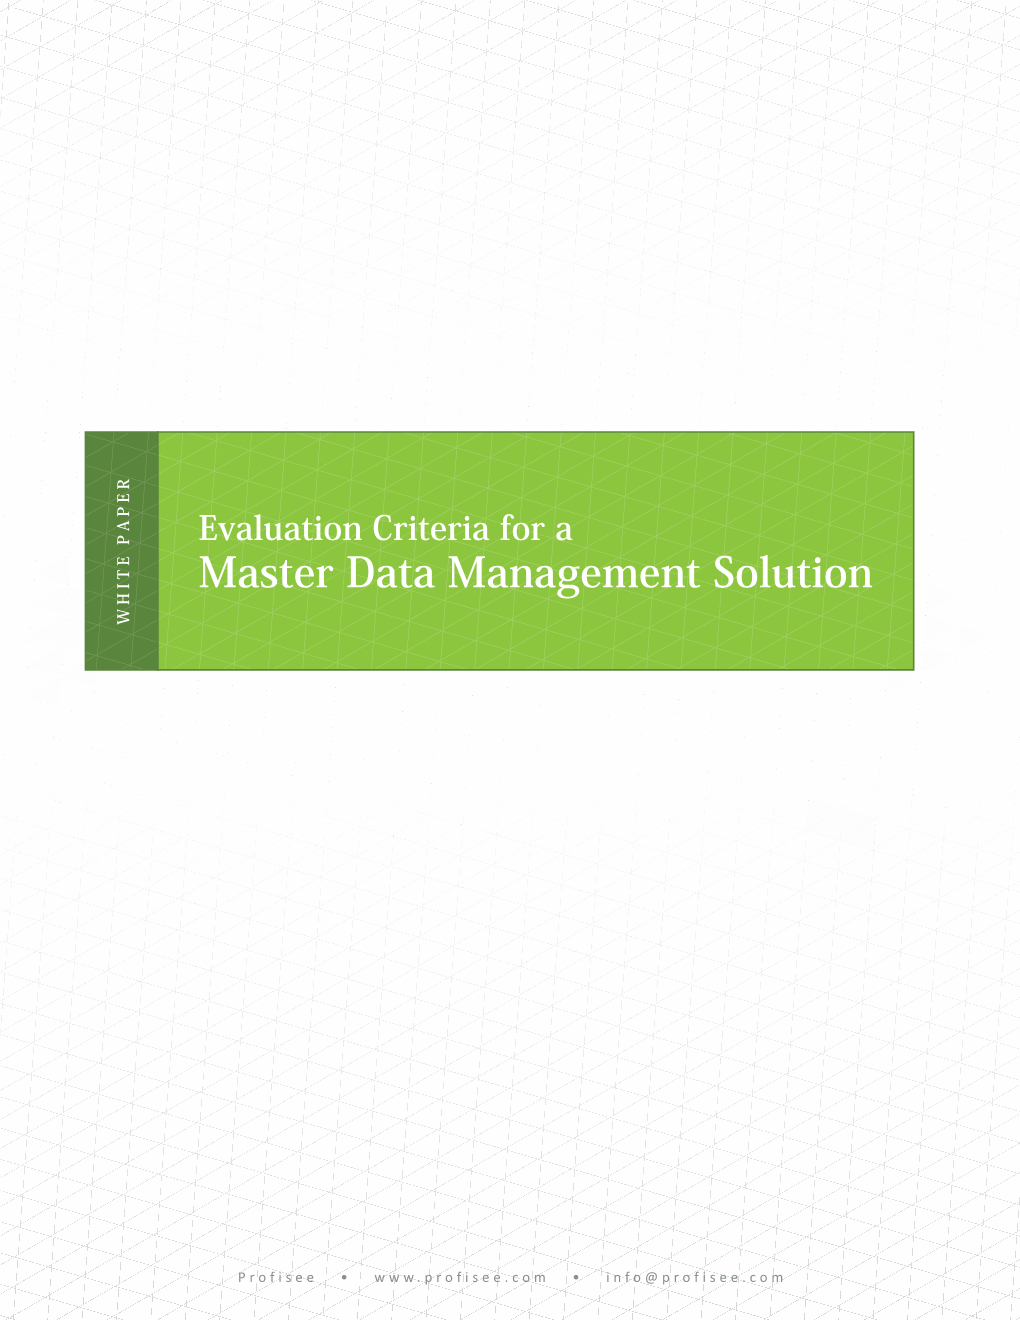 Evaluation Criteria for a Master Data Management Solution WHITE PAPER